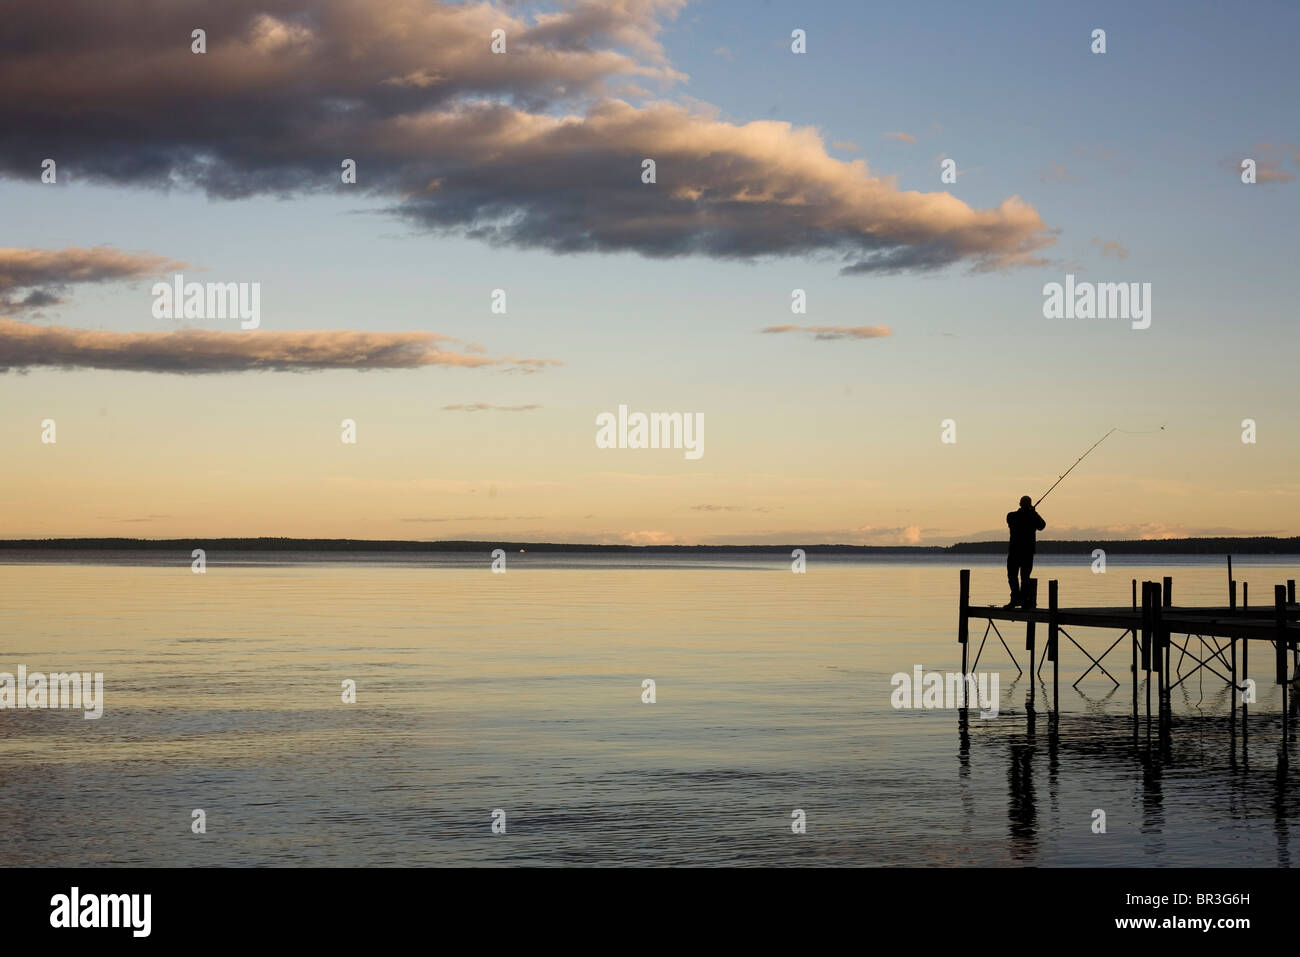 A man casts his fishing line from a silhouetted dock above the calm, clear water. Stock Photo